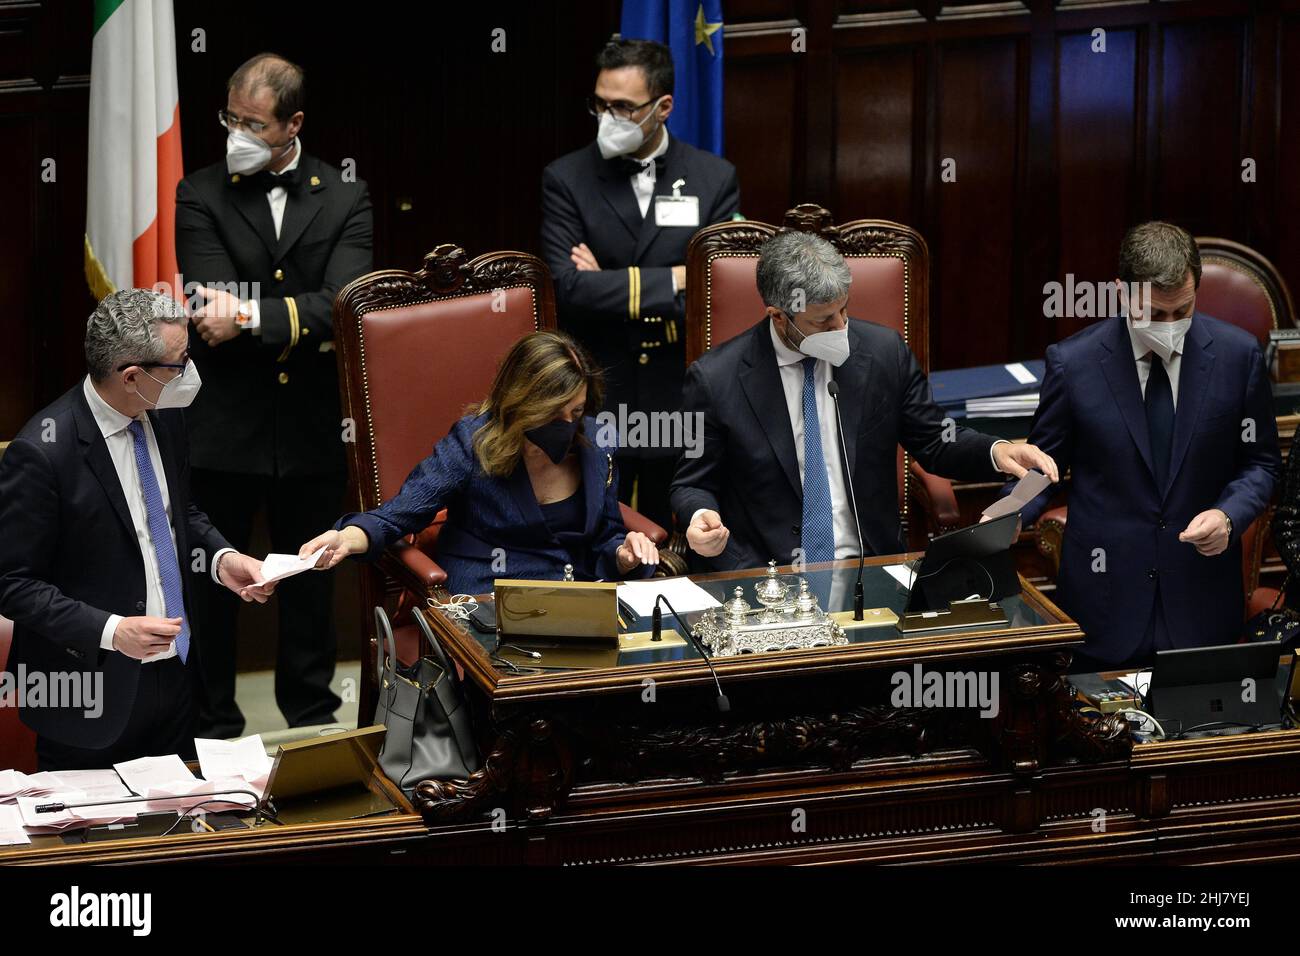 Italy, Rome, January 26, 2022 : Italian Parliament, Chamber of Deputies. Third vote for the election of the Italian President of the Republic In the picture : Maria Elisabetta Alberti Casellati (President of the Senate) and Roberto Fico (President of the Chamber of Deputies) during the counting of ballot papers    Photo © Fabio Cimaglia/Sintesi/Alamy Live News Stock Photo